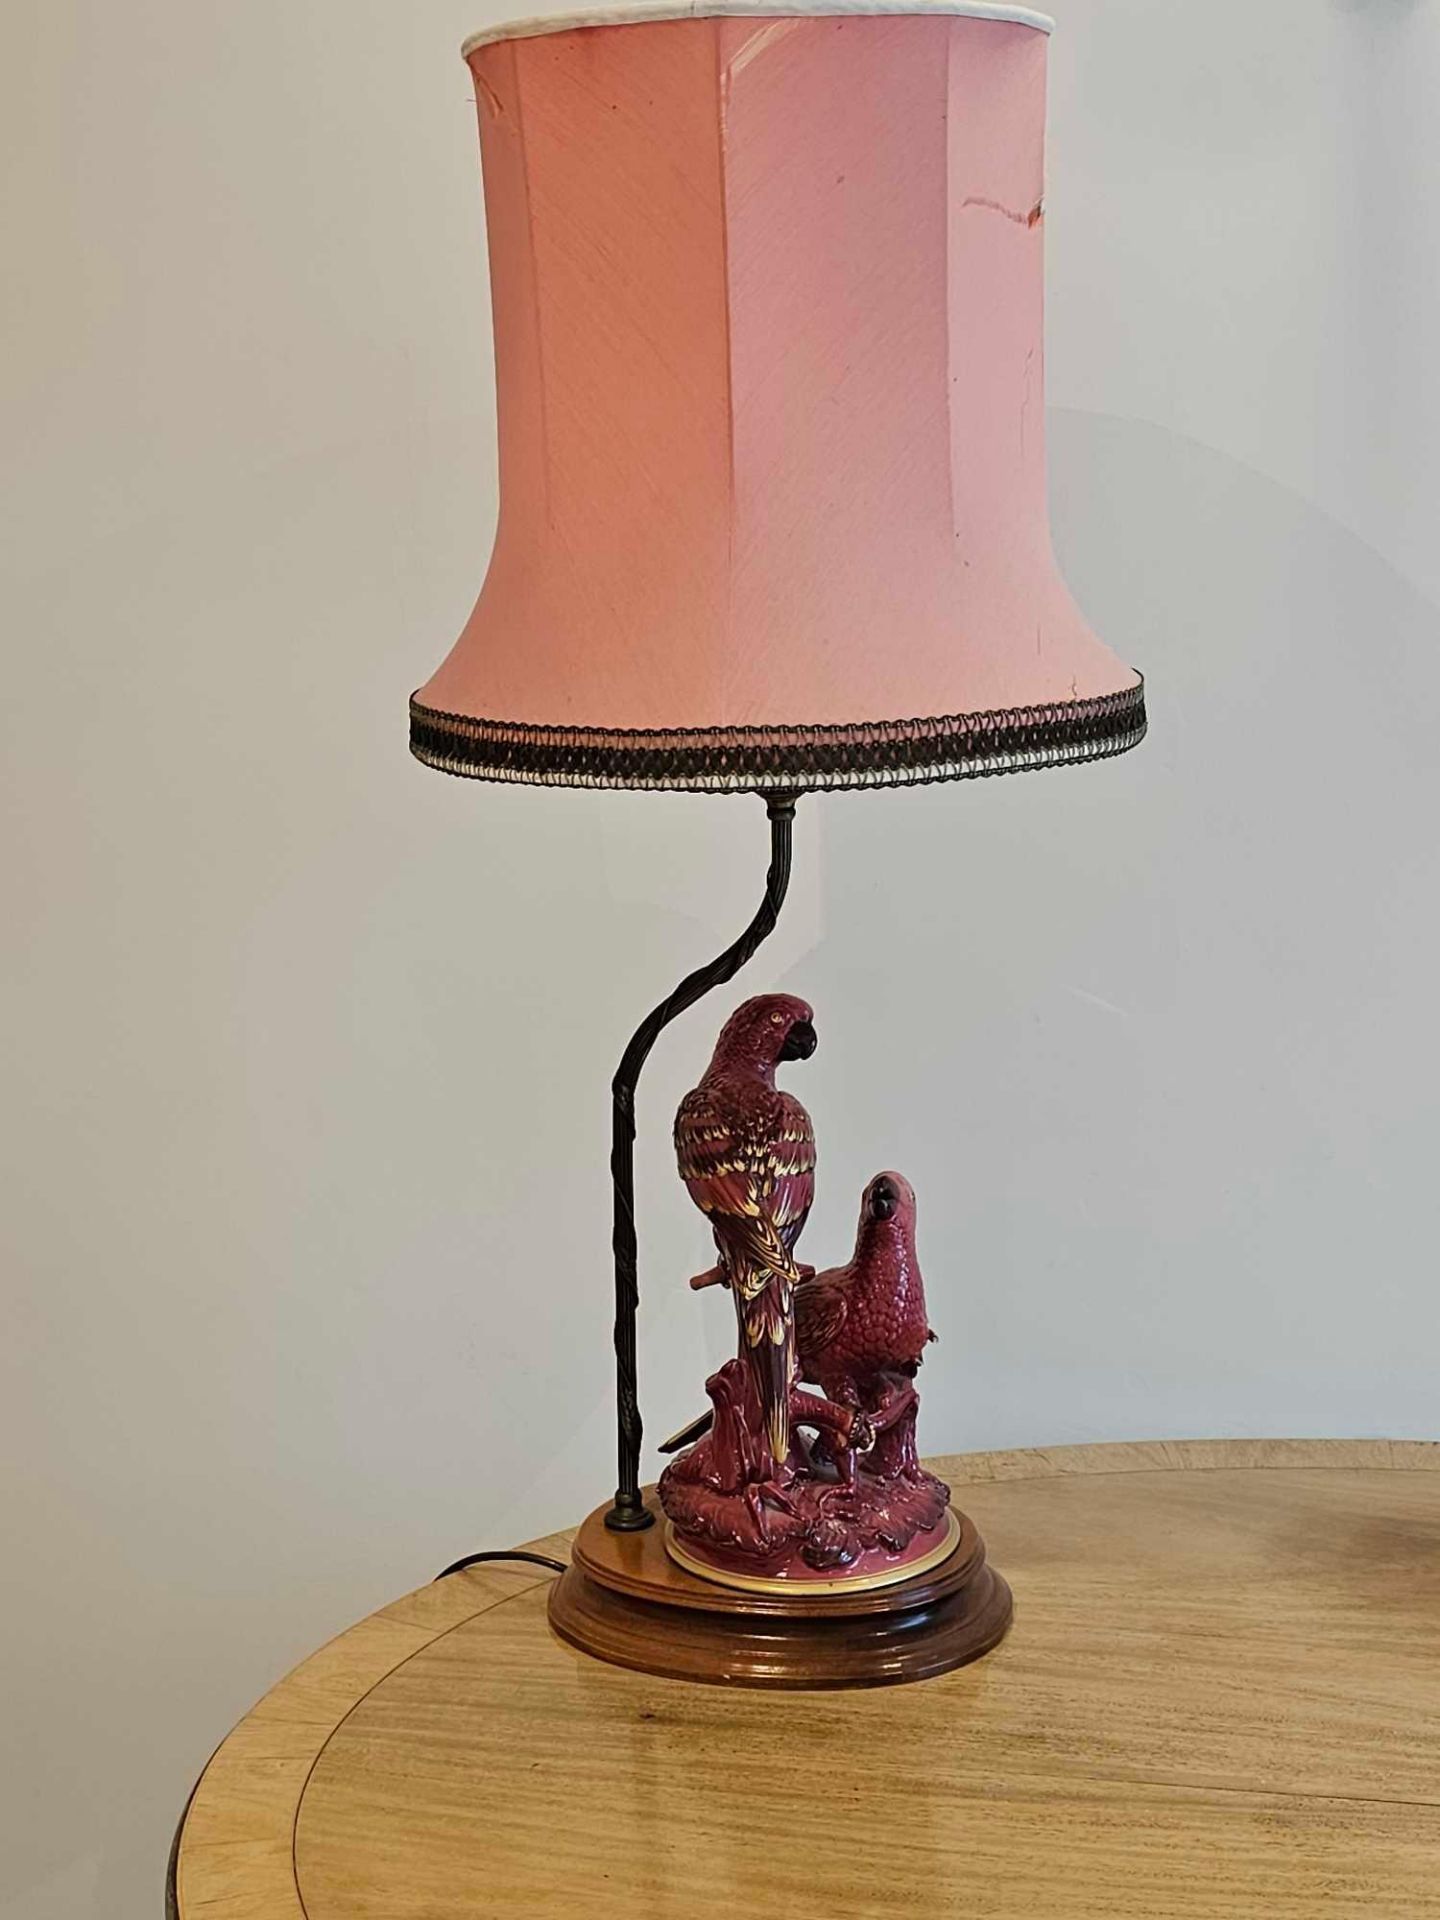 A Vintage Table Lamp Decorated With A Pair Of Painted Ceramic Parrots Sitting Upon A Wooden Base